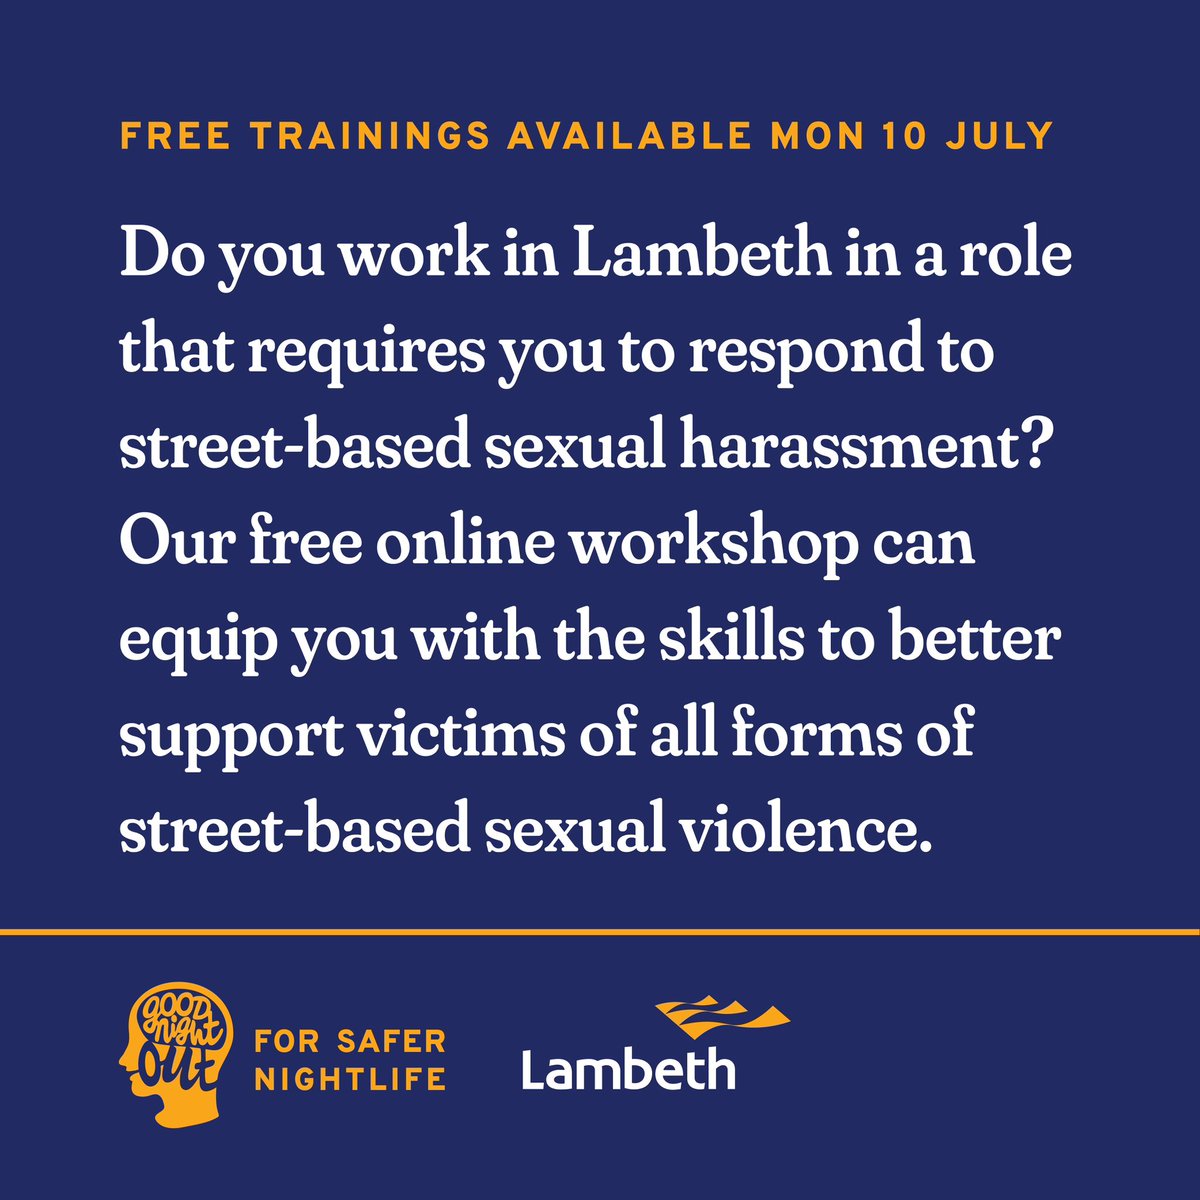 We have two free training opportunities coming up in July for licensed venue staff in the boroughs of Epsom & Ewell and Lambeth respectively! 🙌 We’re running both in-person and Zoom-based workshops focused preventing and responding to sexual violence. Register below 👇